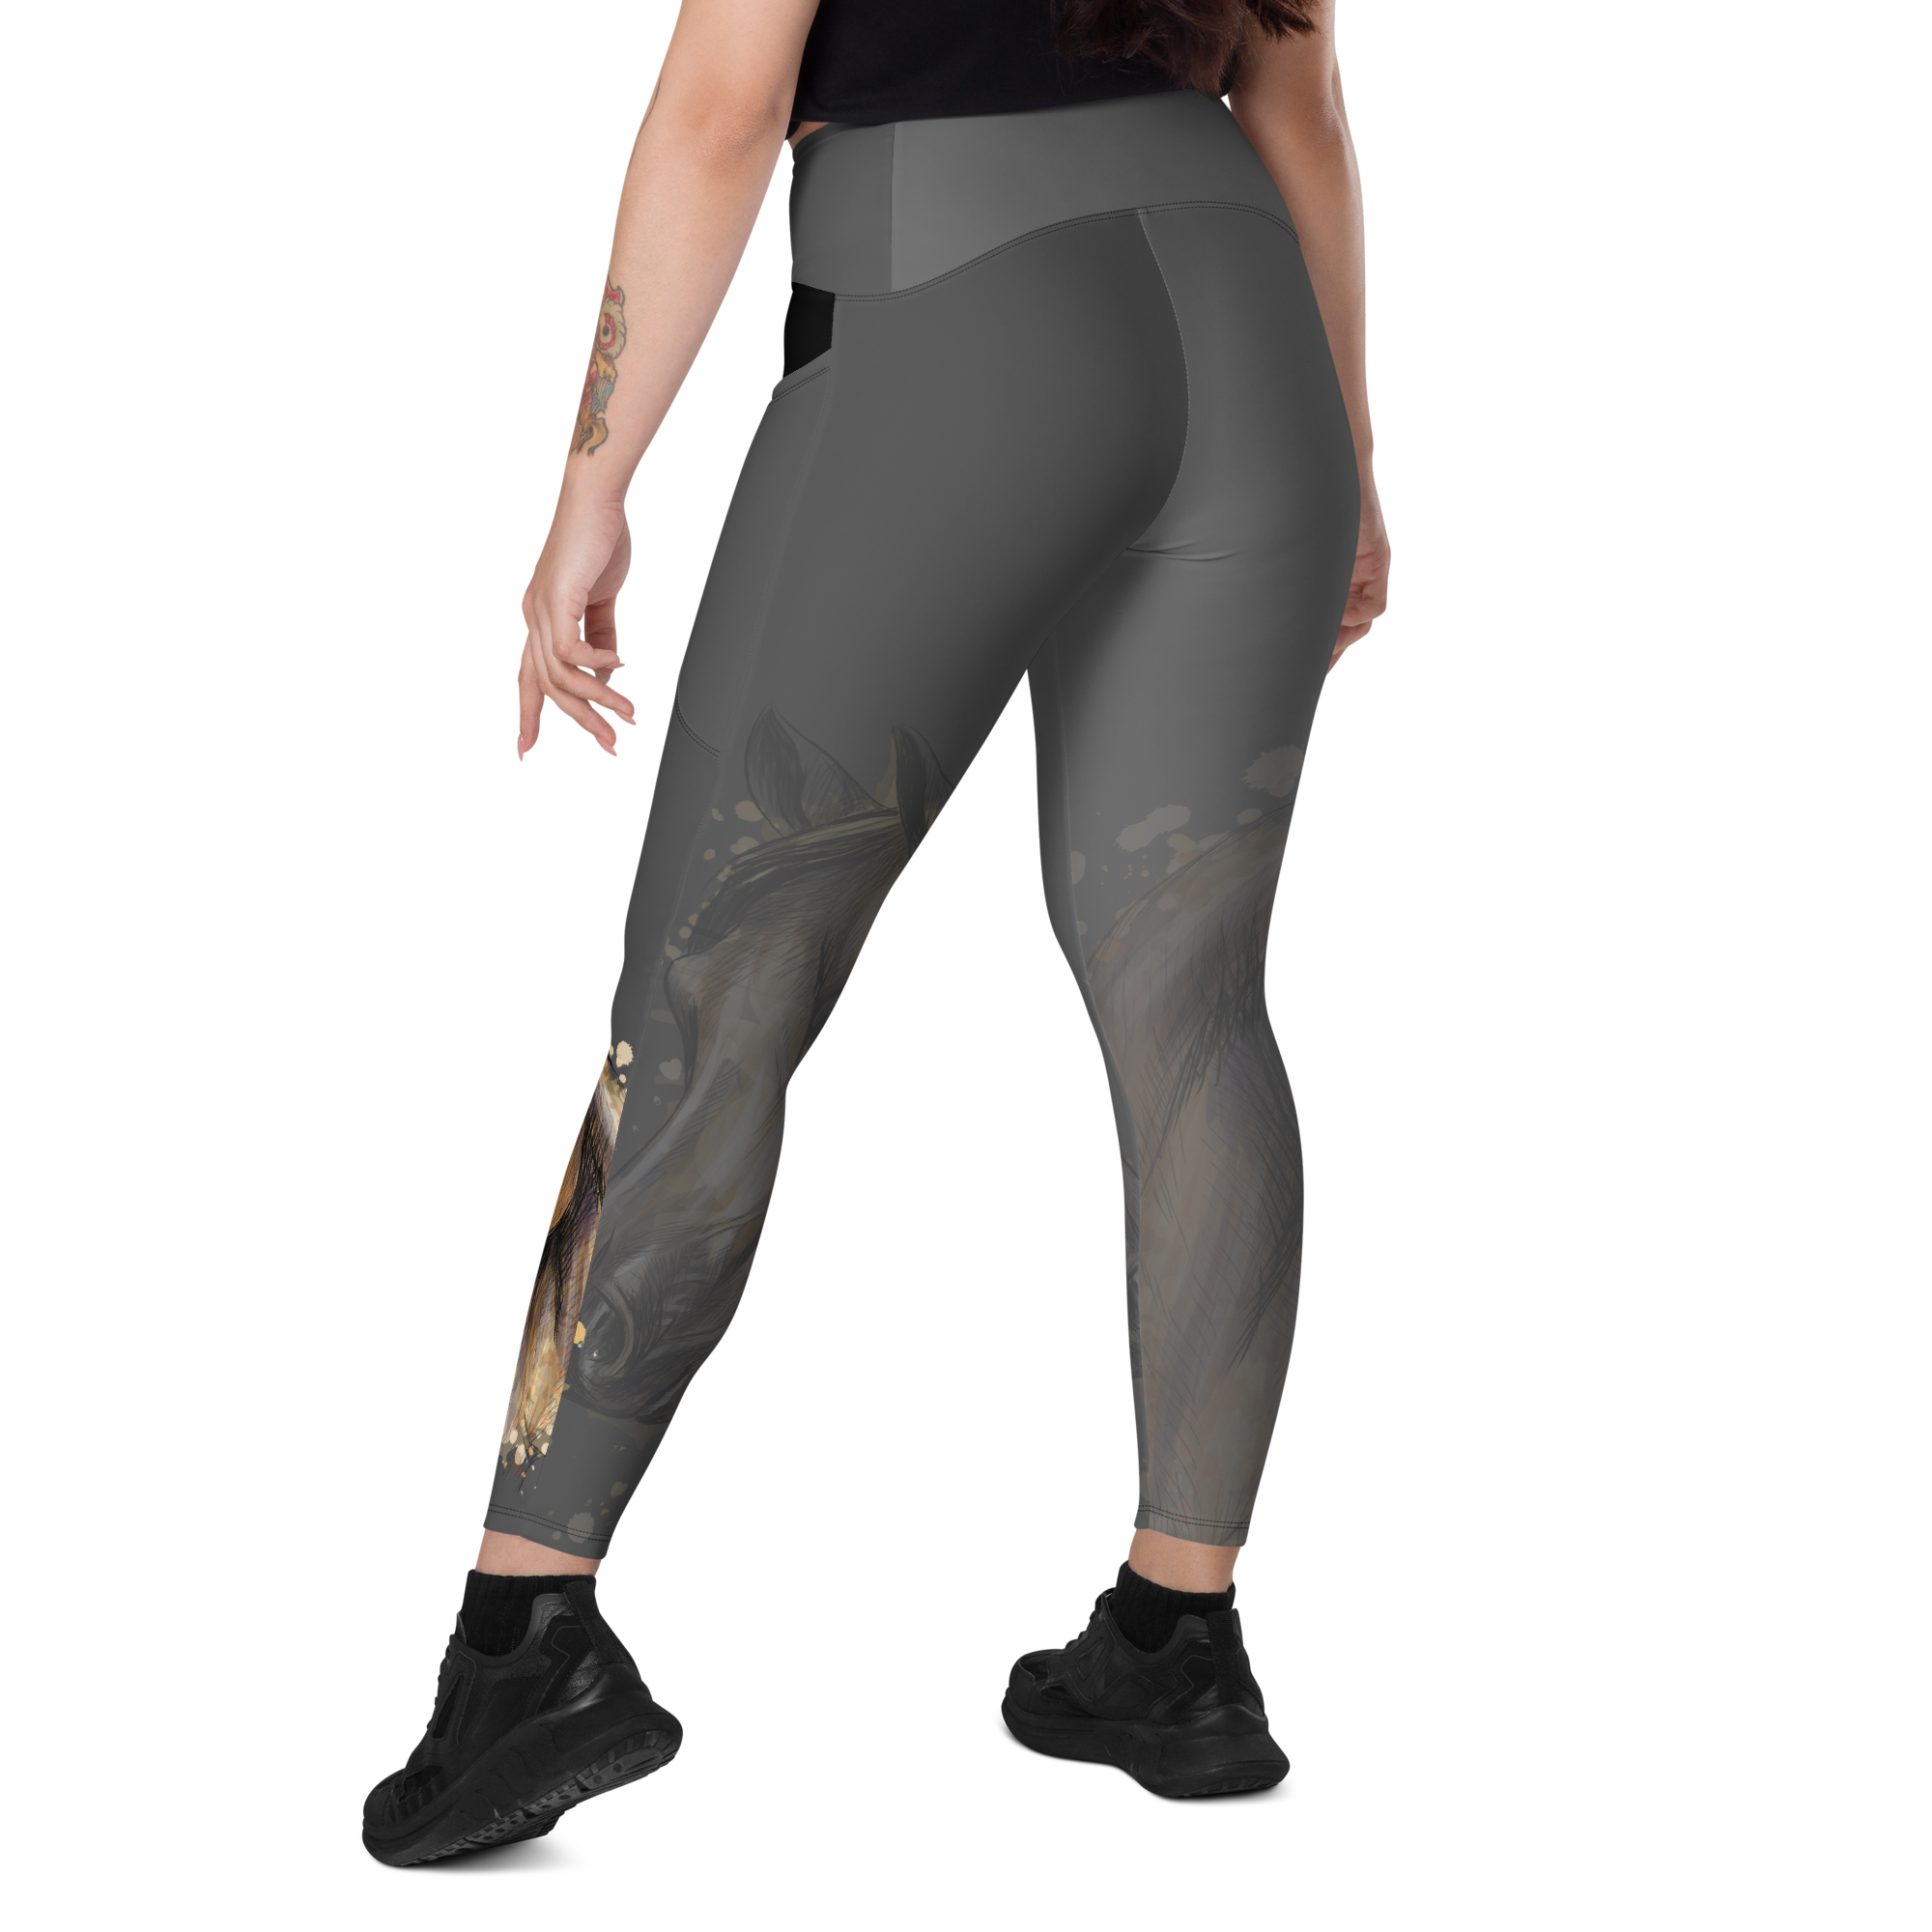 Grey Horse Silhouette Leggings with pockets